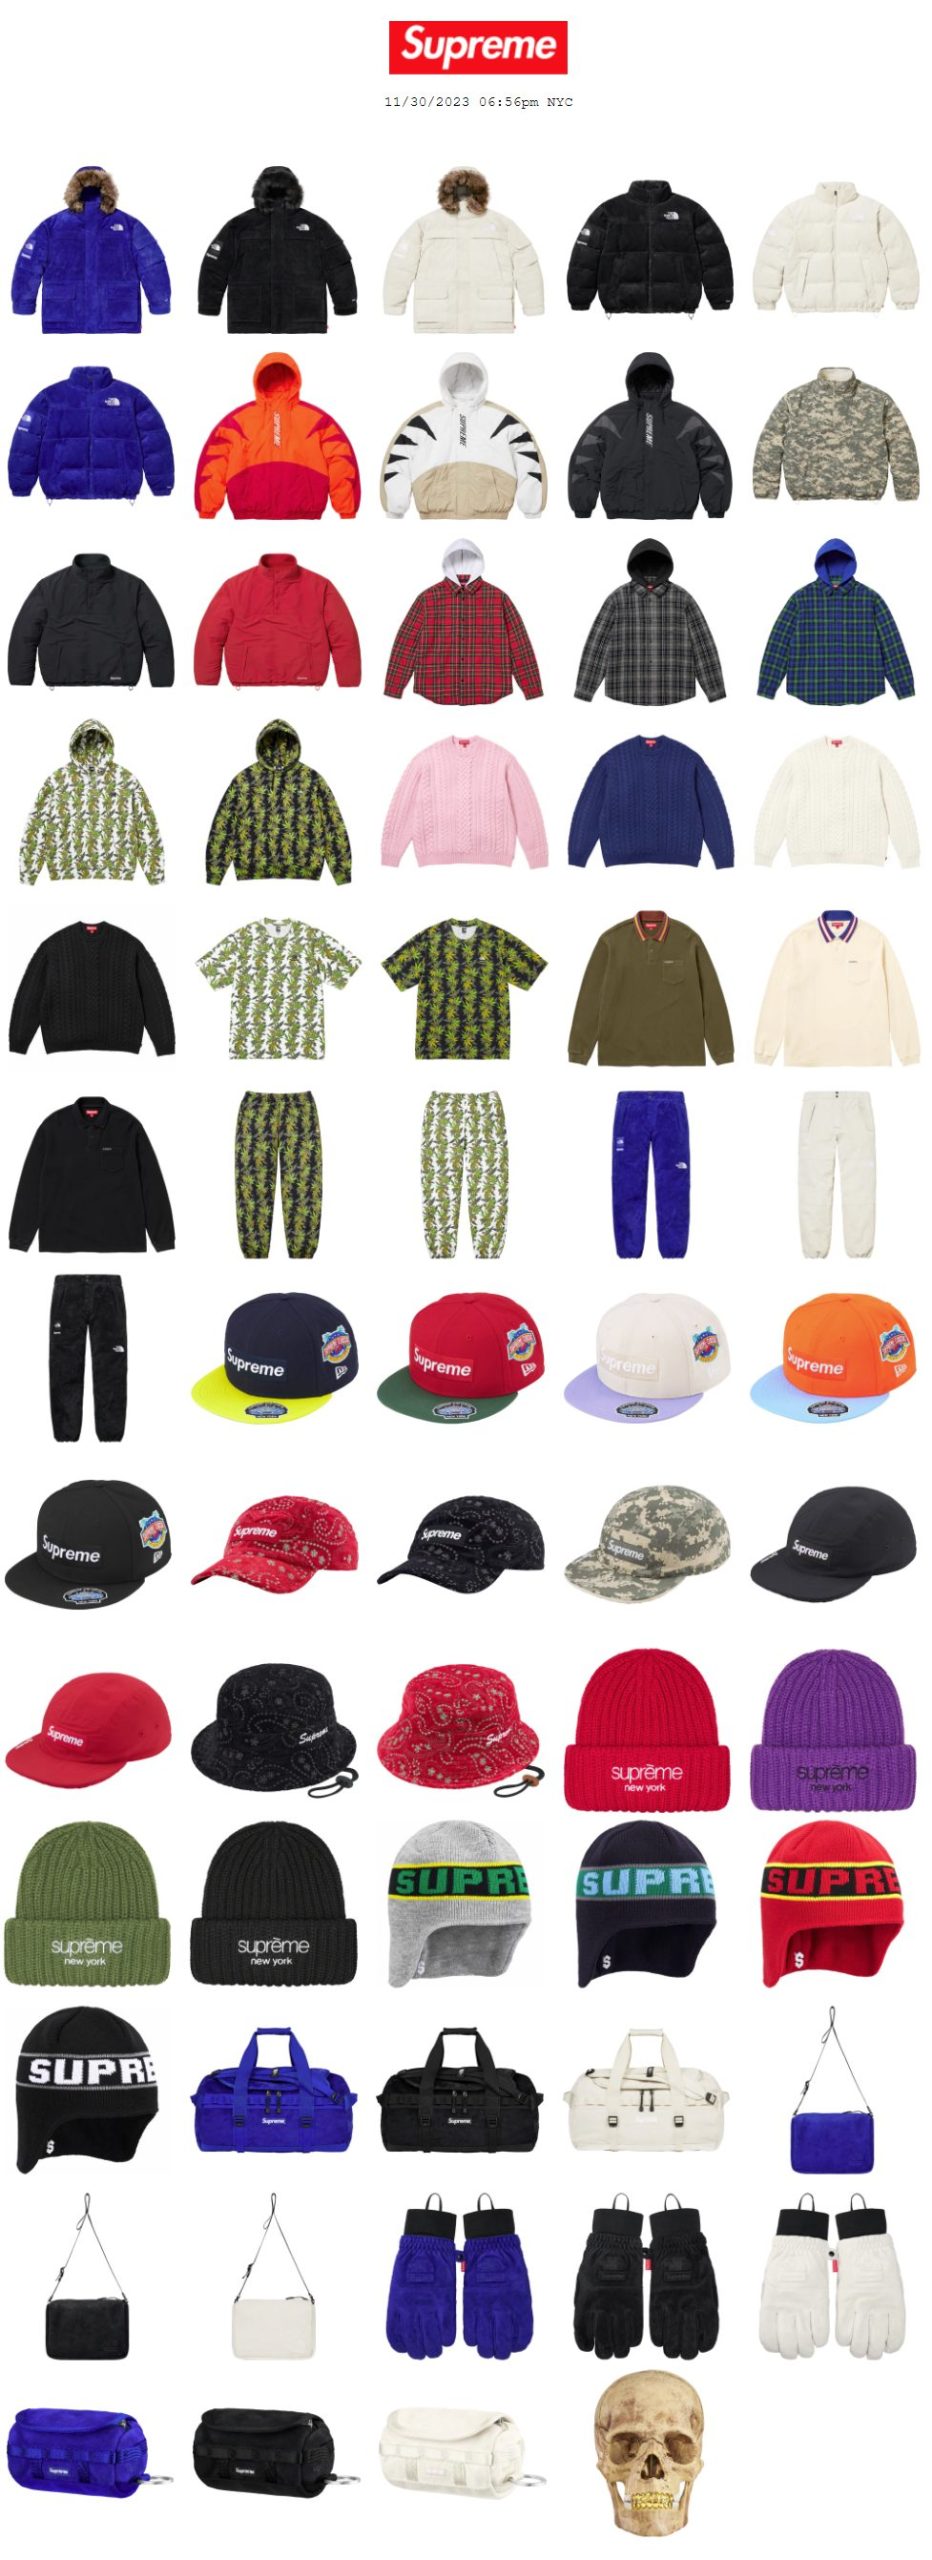 Supreme 公式通販サイトで12月2日 Week15に発売予定の23FW 23AW 新作 